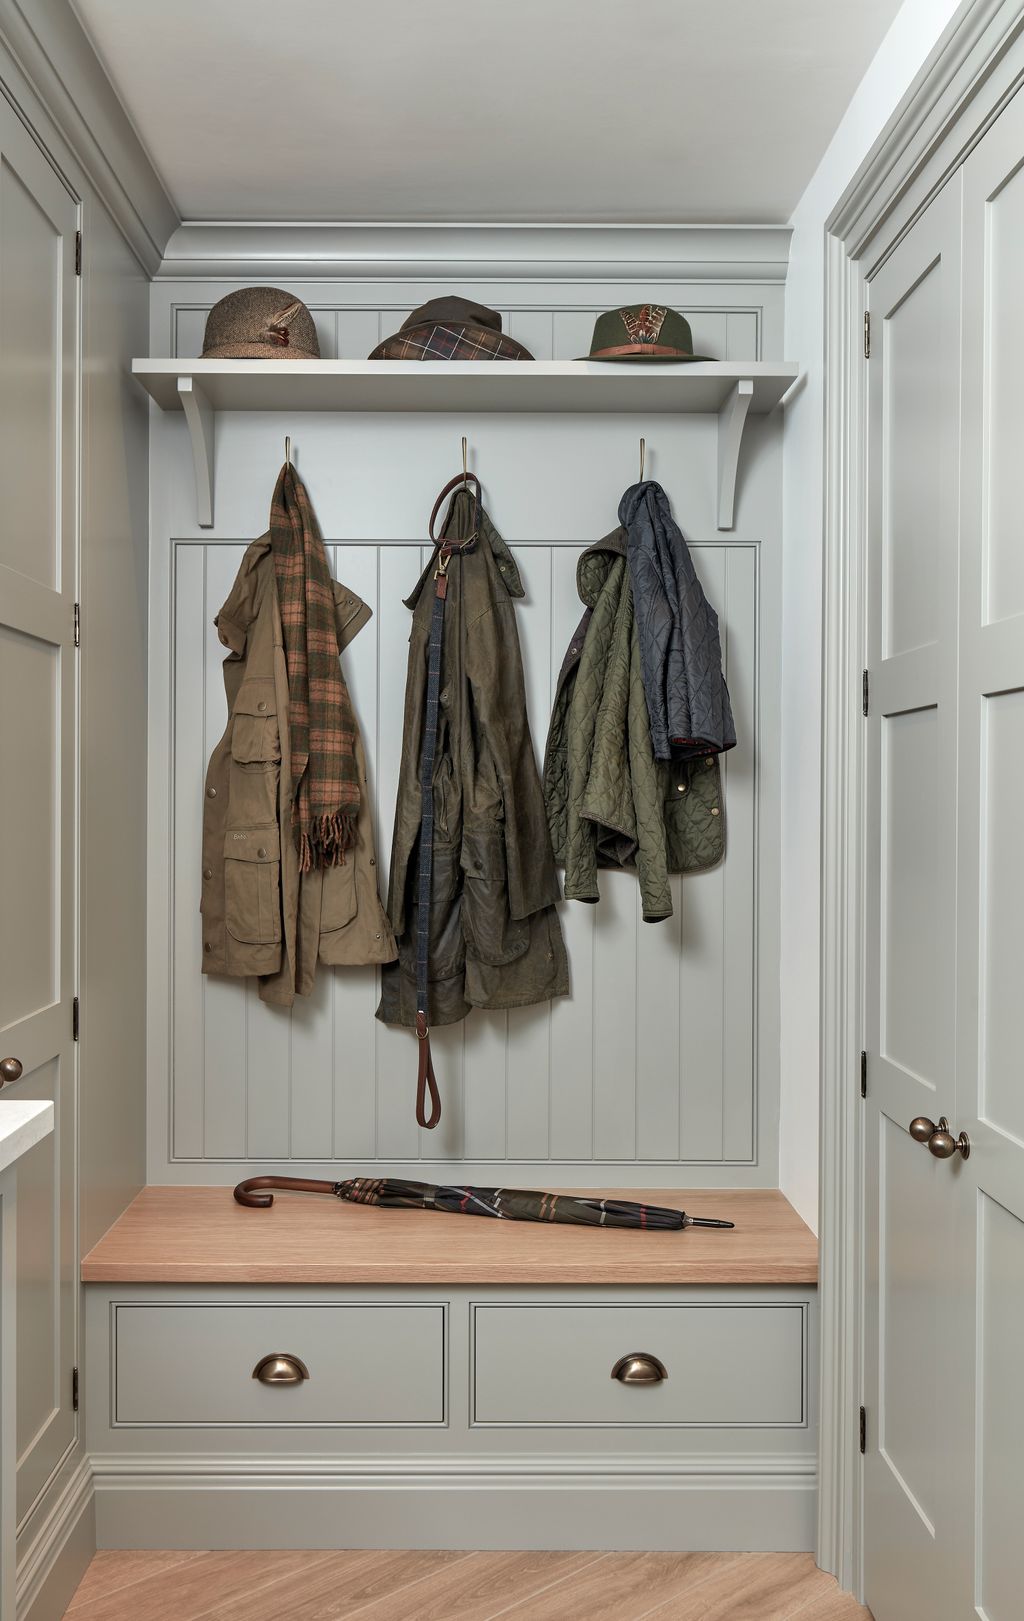 12 mudroom storage ideas for an organized entryway | Real Homes